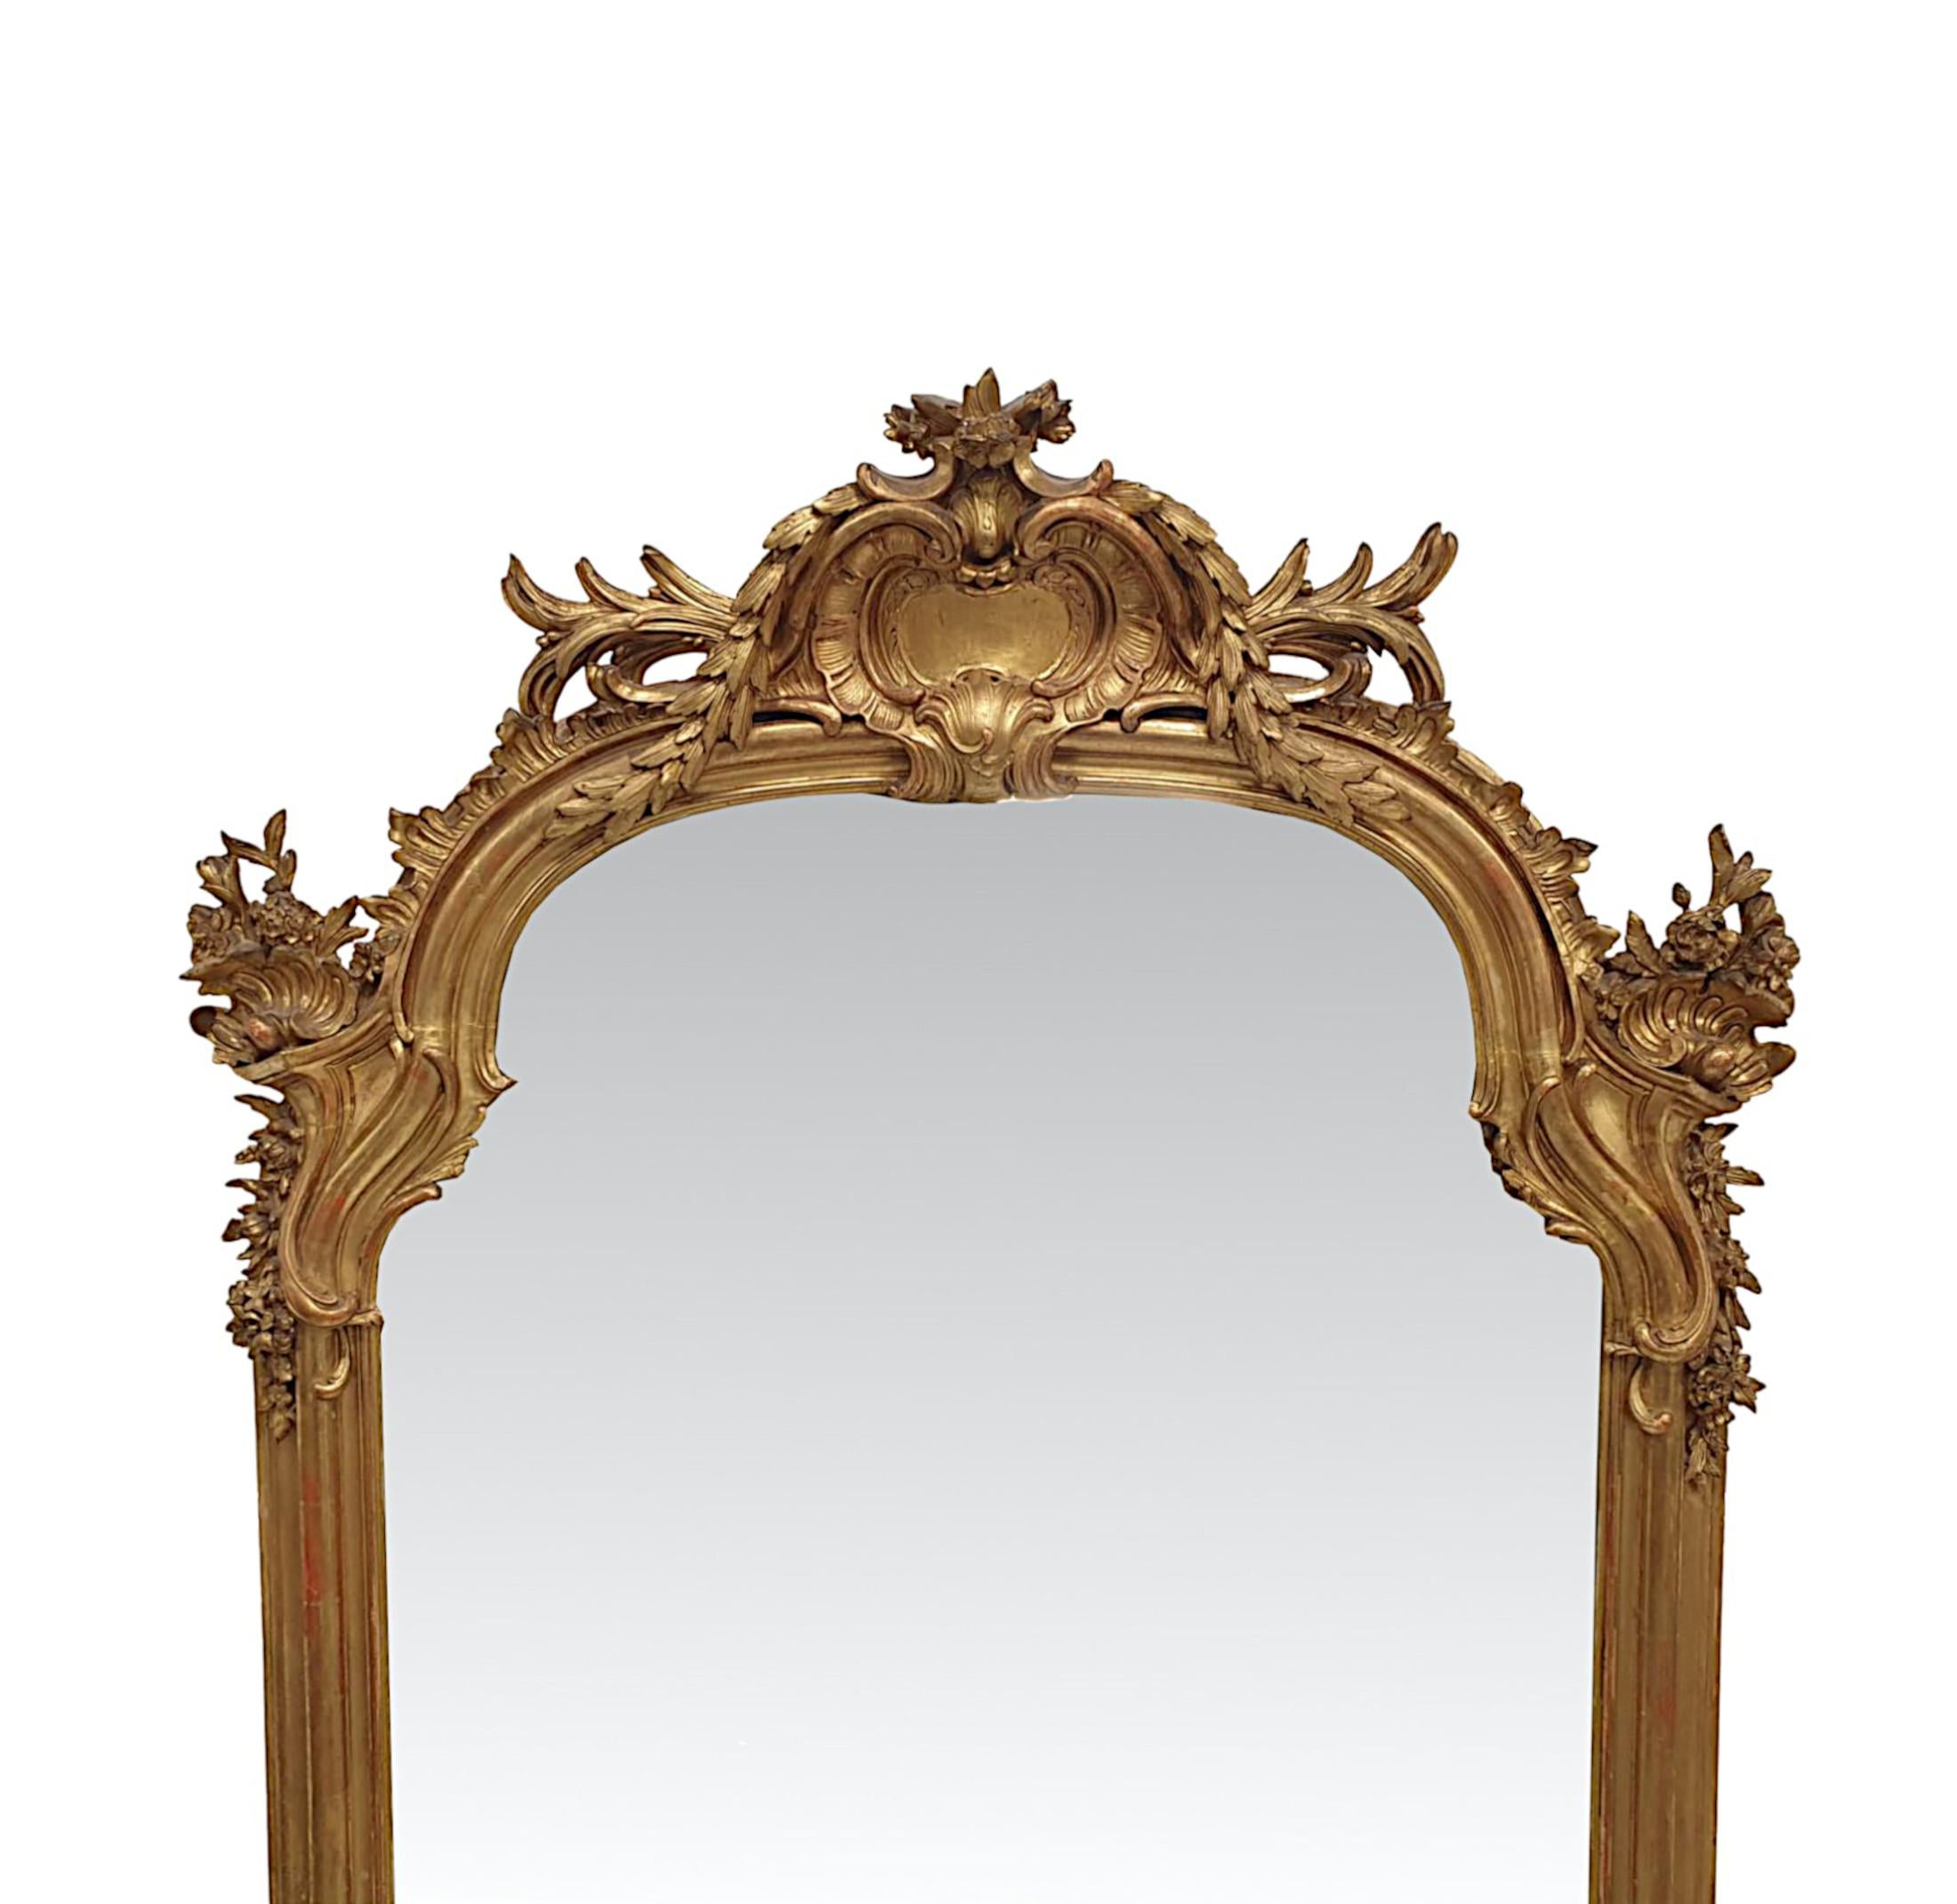 A fabulous 19th Century giltwood hall or overmantel mirror of exceptional quality and grand proportions.  The shaped mirror glass plate is set within a finely hand carved, moulded and fluted gilt wood frame adorned throughout with scrolls, trailing